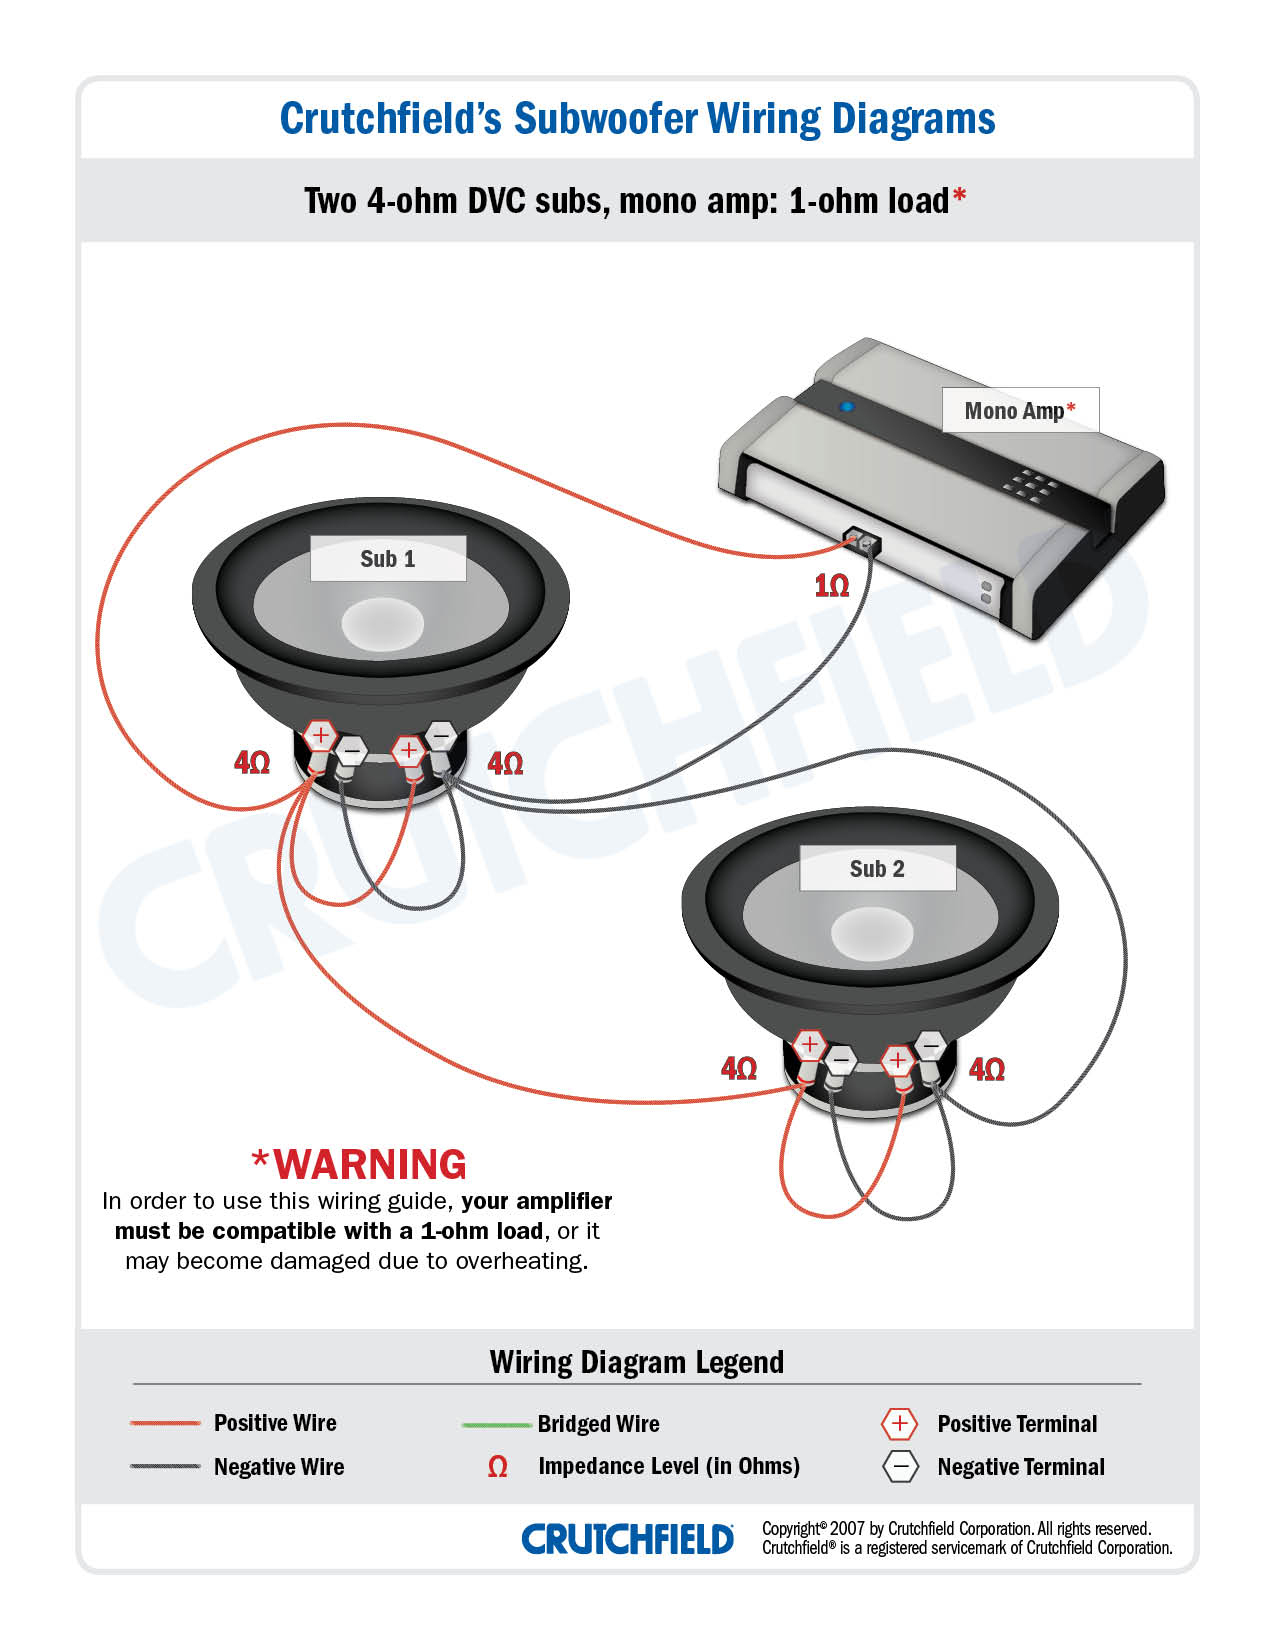 Subwoofer Wiring Diagrams — How To Wire Your Subs - Kicker Comp R 12 Wiring Diagram